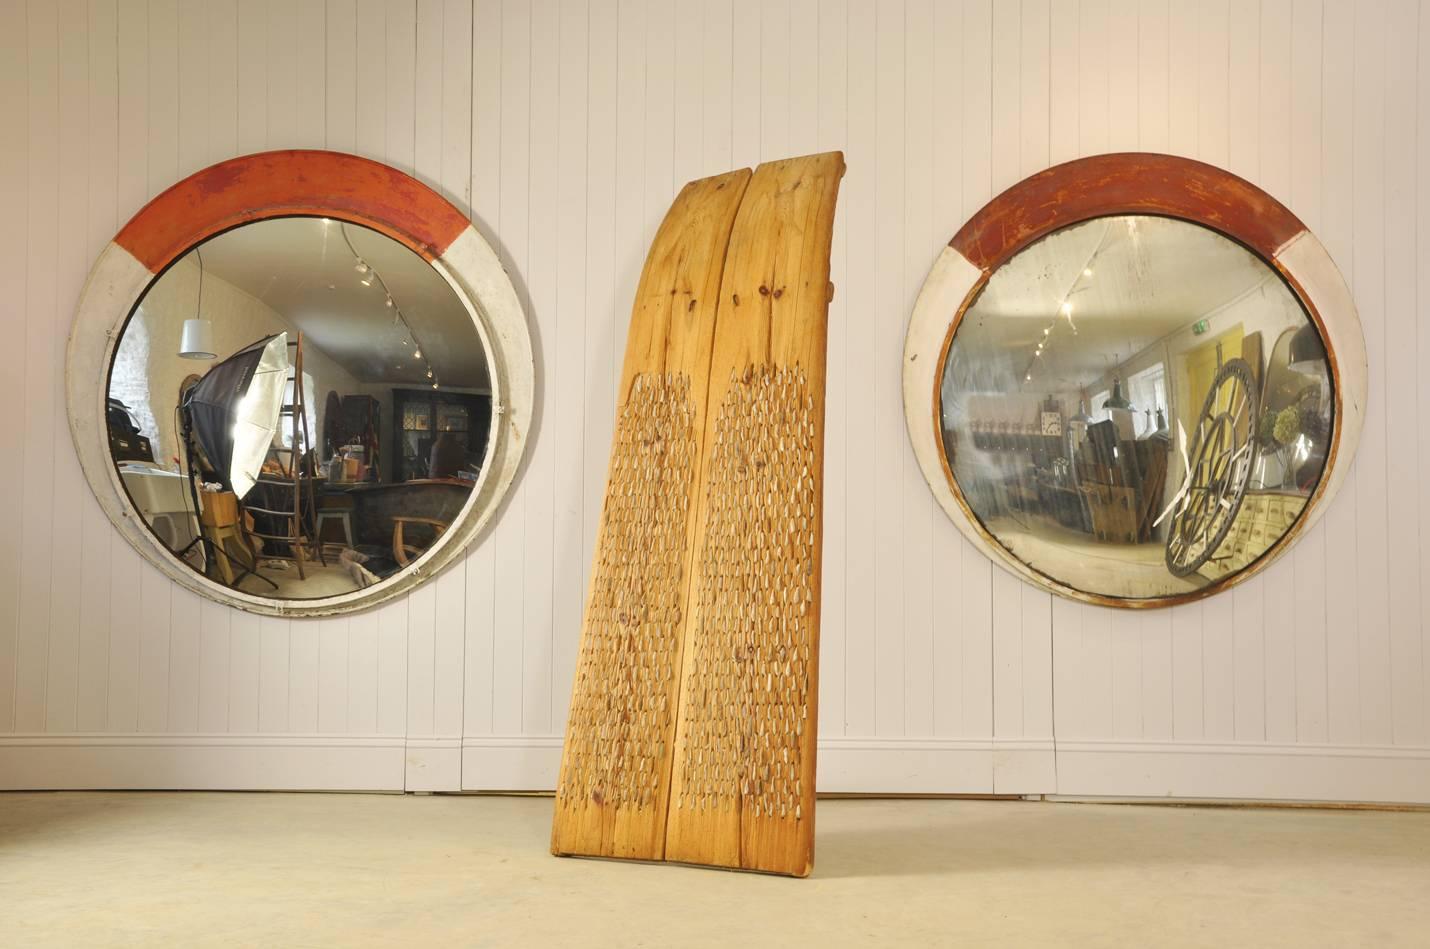 Huge Convex Railway Mirrors In Distressed Condition For Sale In Cirencester, Gloucestershire